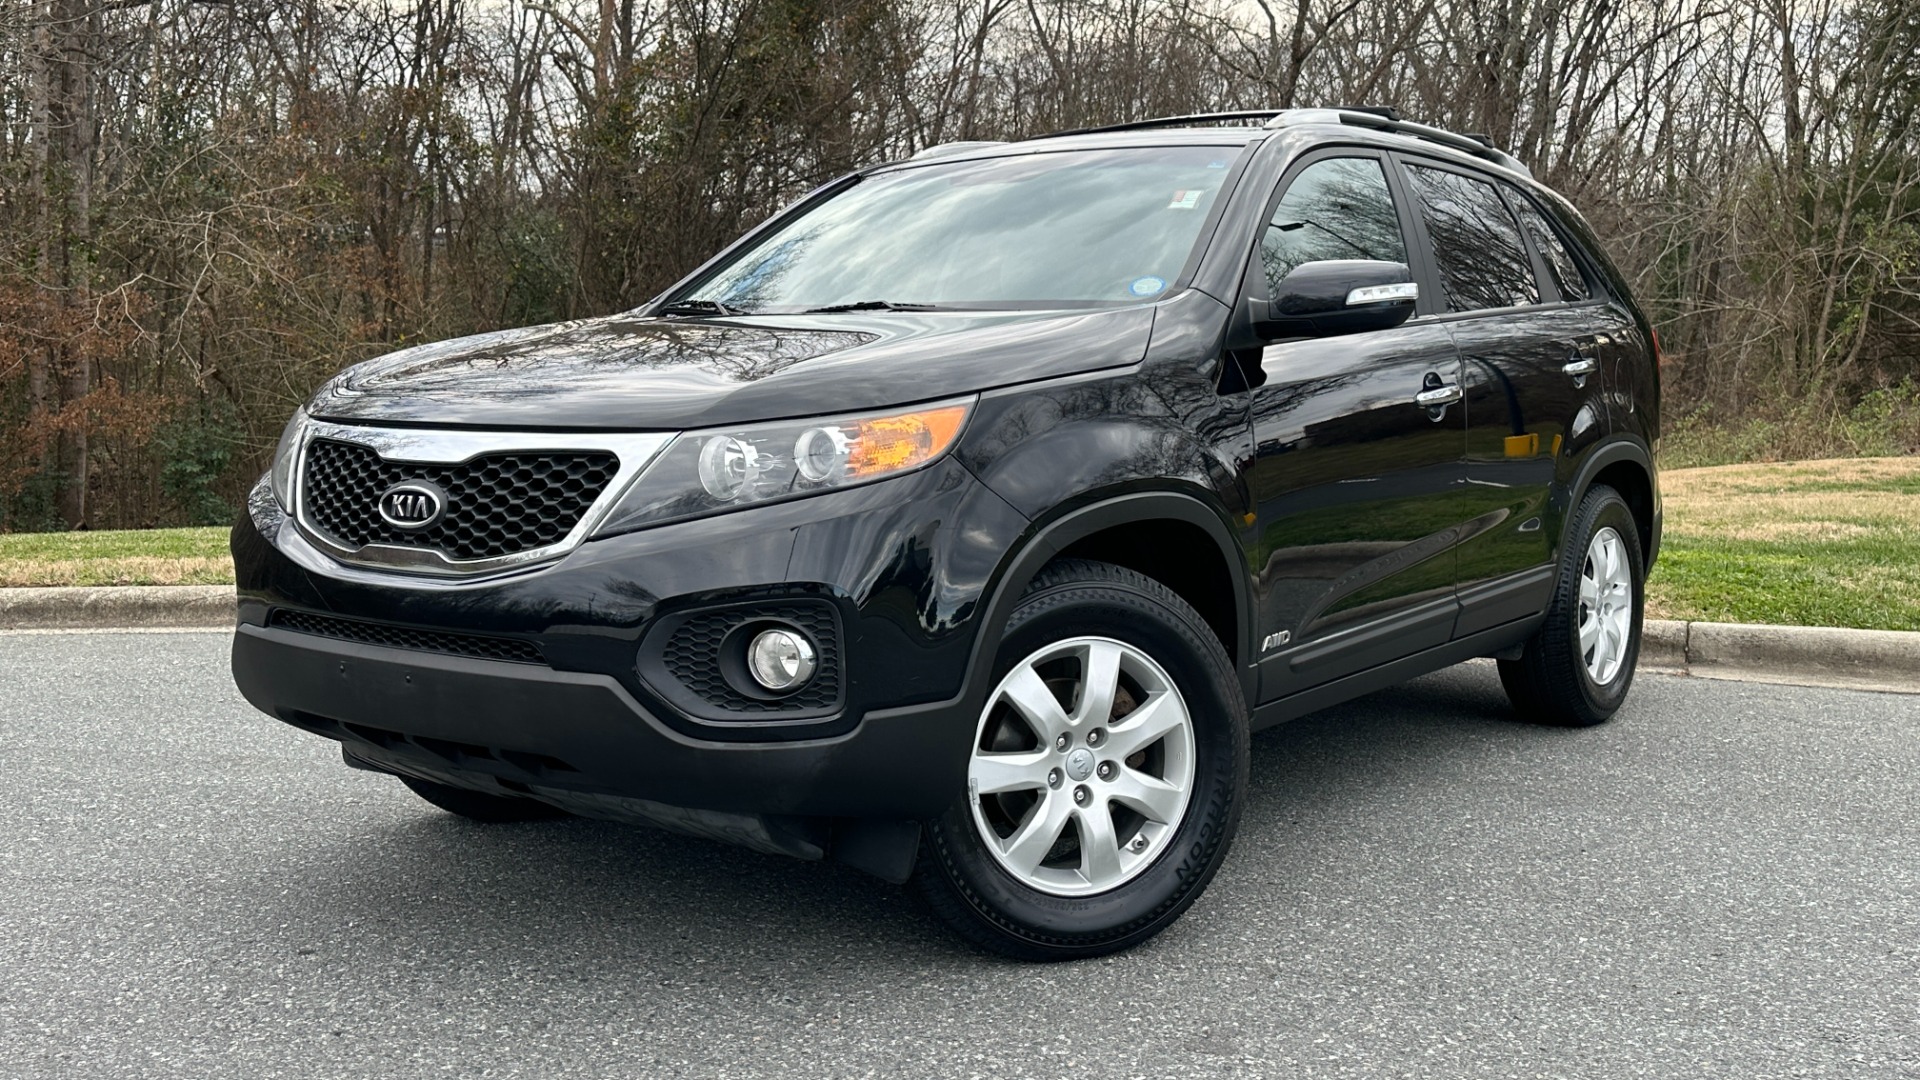 Used 2013 Kia Sorento LX / CONVENIENCE / AWD / 4CYL / CLOTH INTERIOR / ROOF RACK for sale $9,395 at Formula Imports in Charlotte NC 28227 1